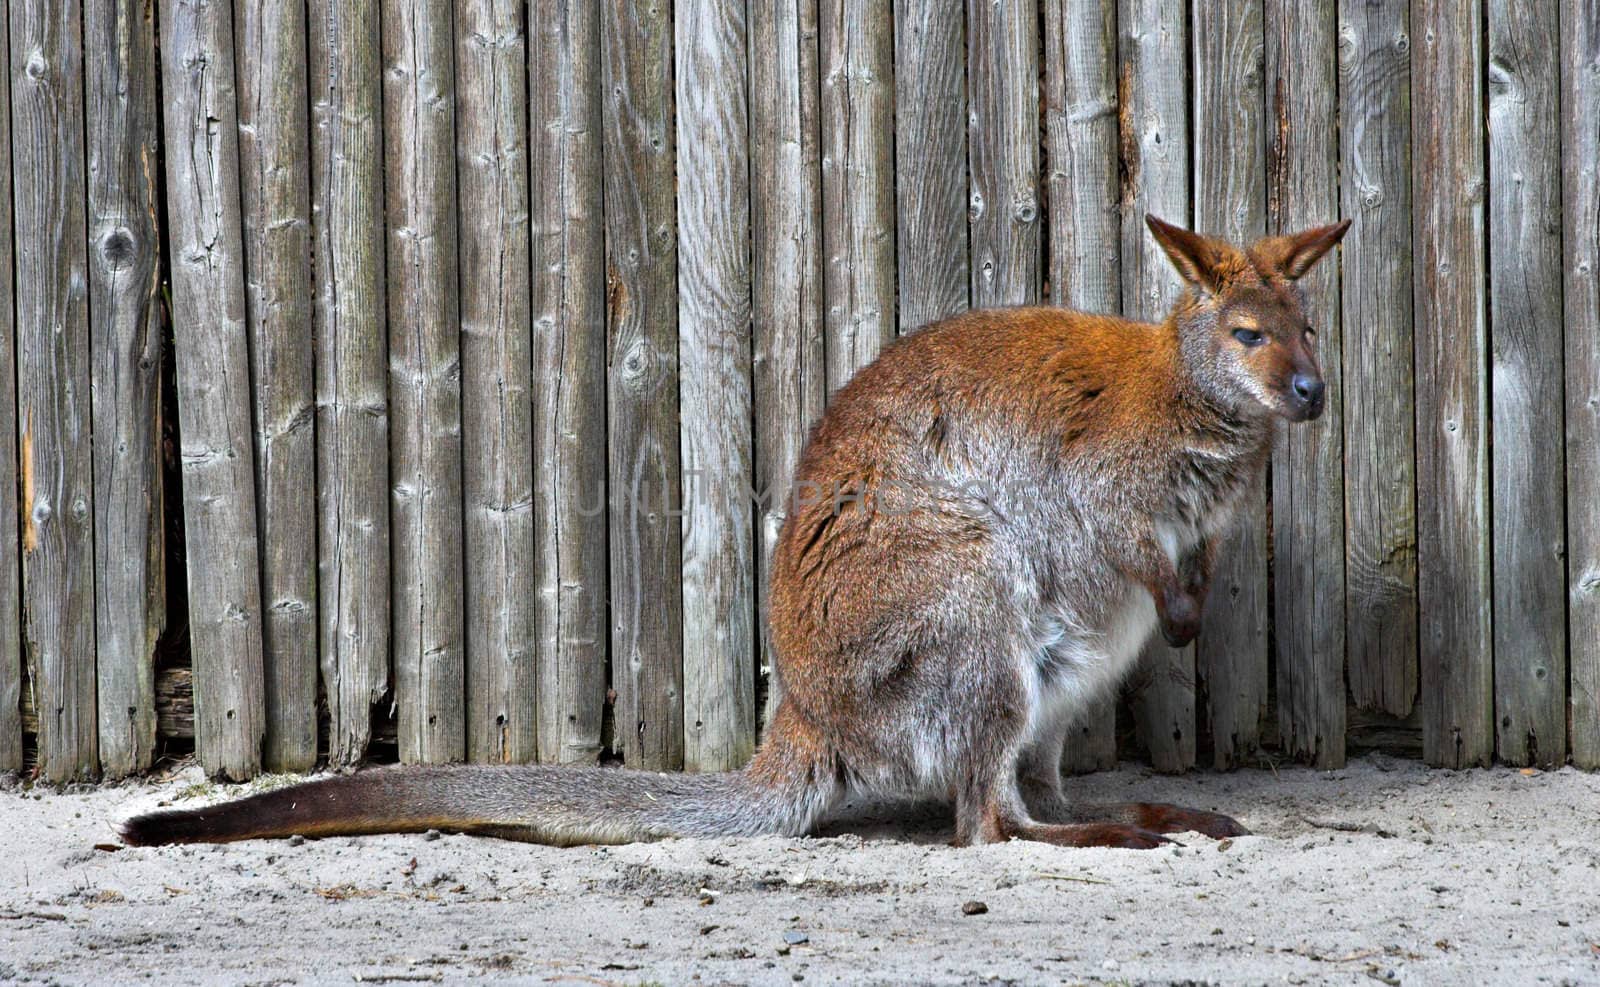 A wallaby in front of a fence